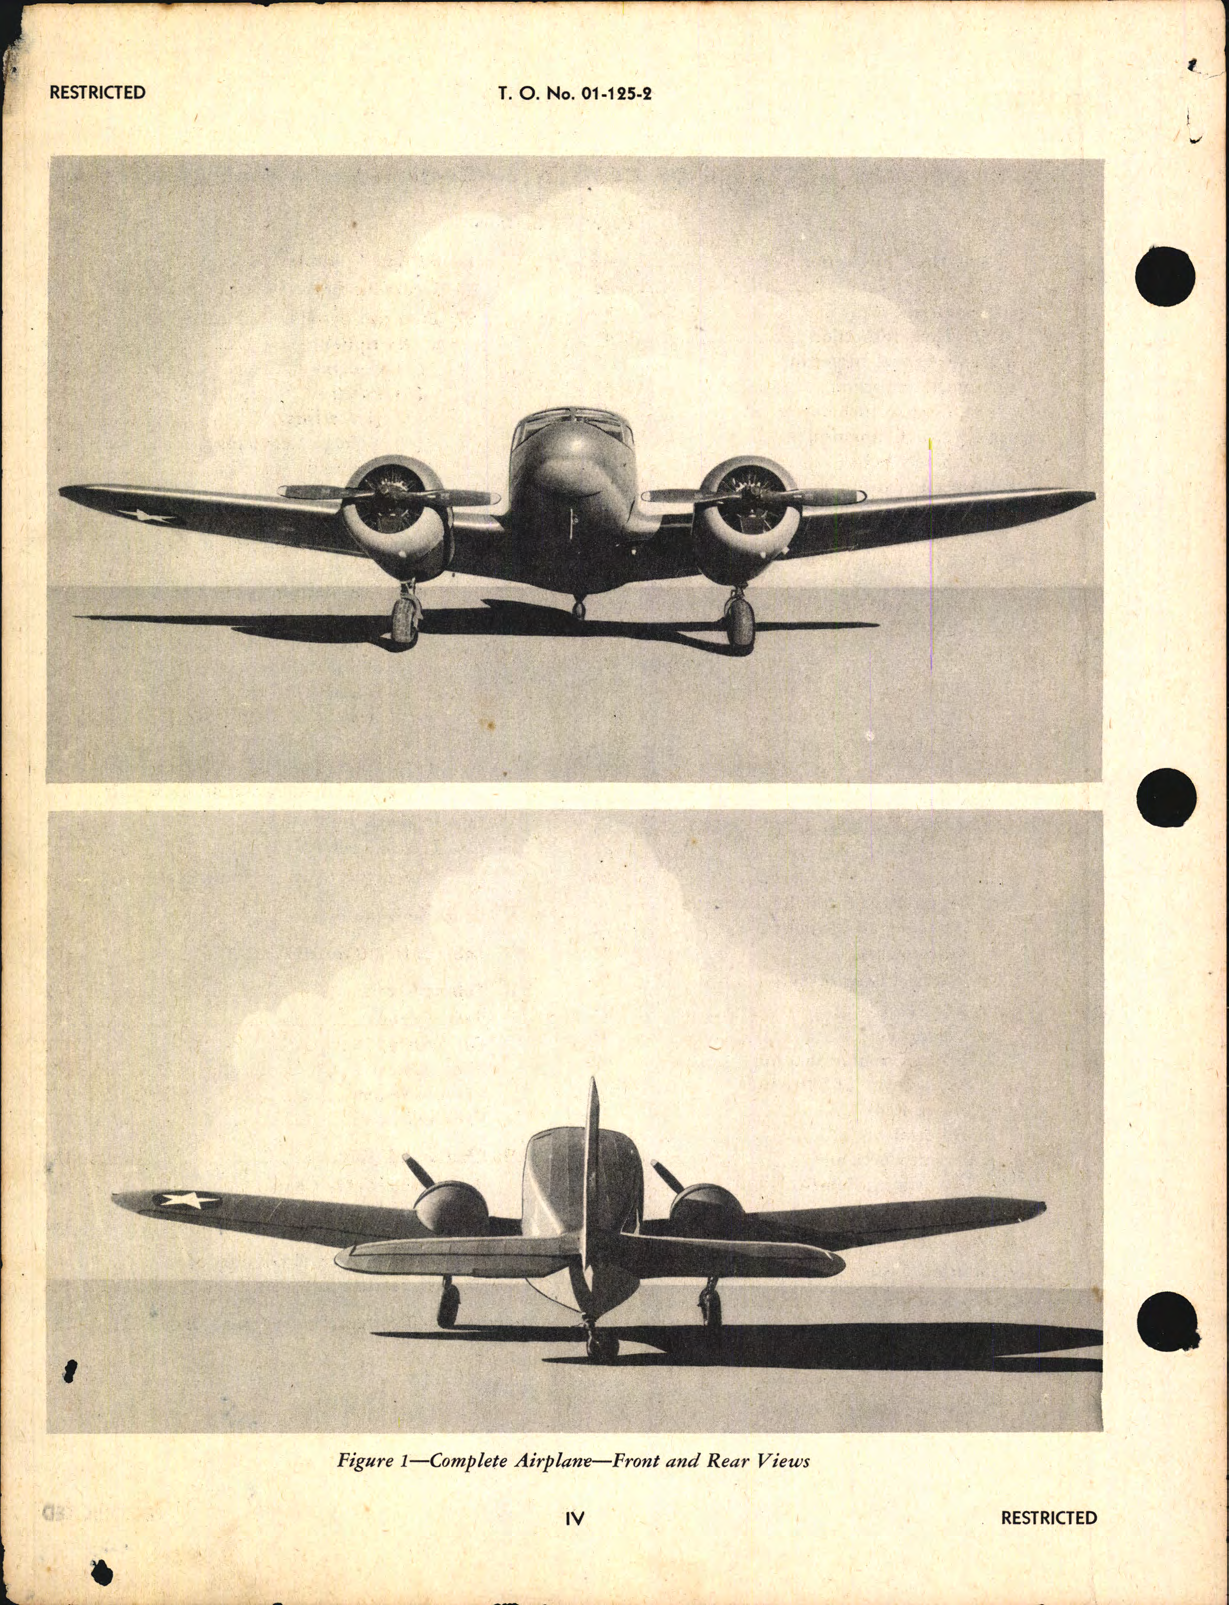 Sample page 6 from AirCorps Library document: Erection & Maintenance instructions for AT-17, UC-78, and JRC-1 Series (Crane I and IA)